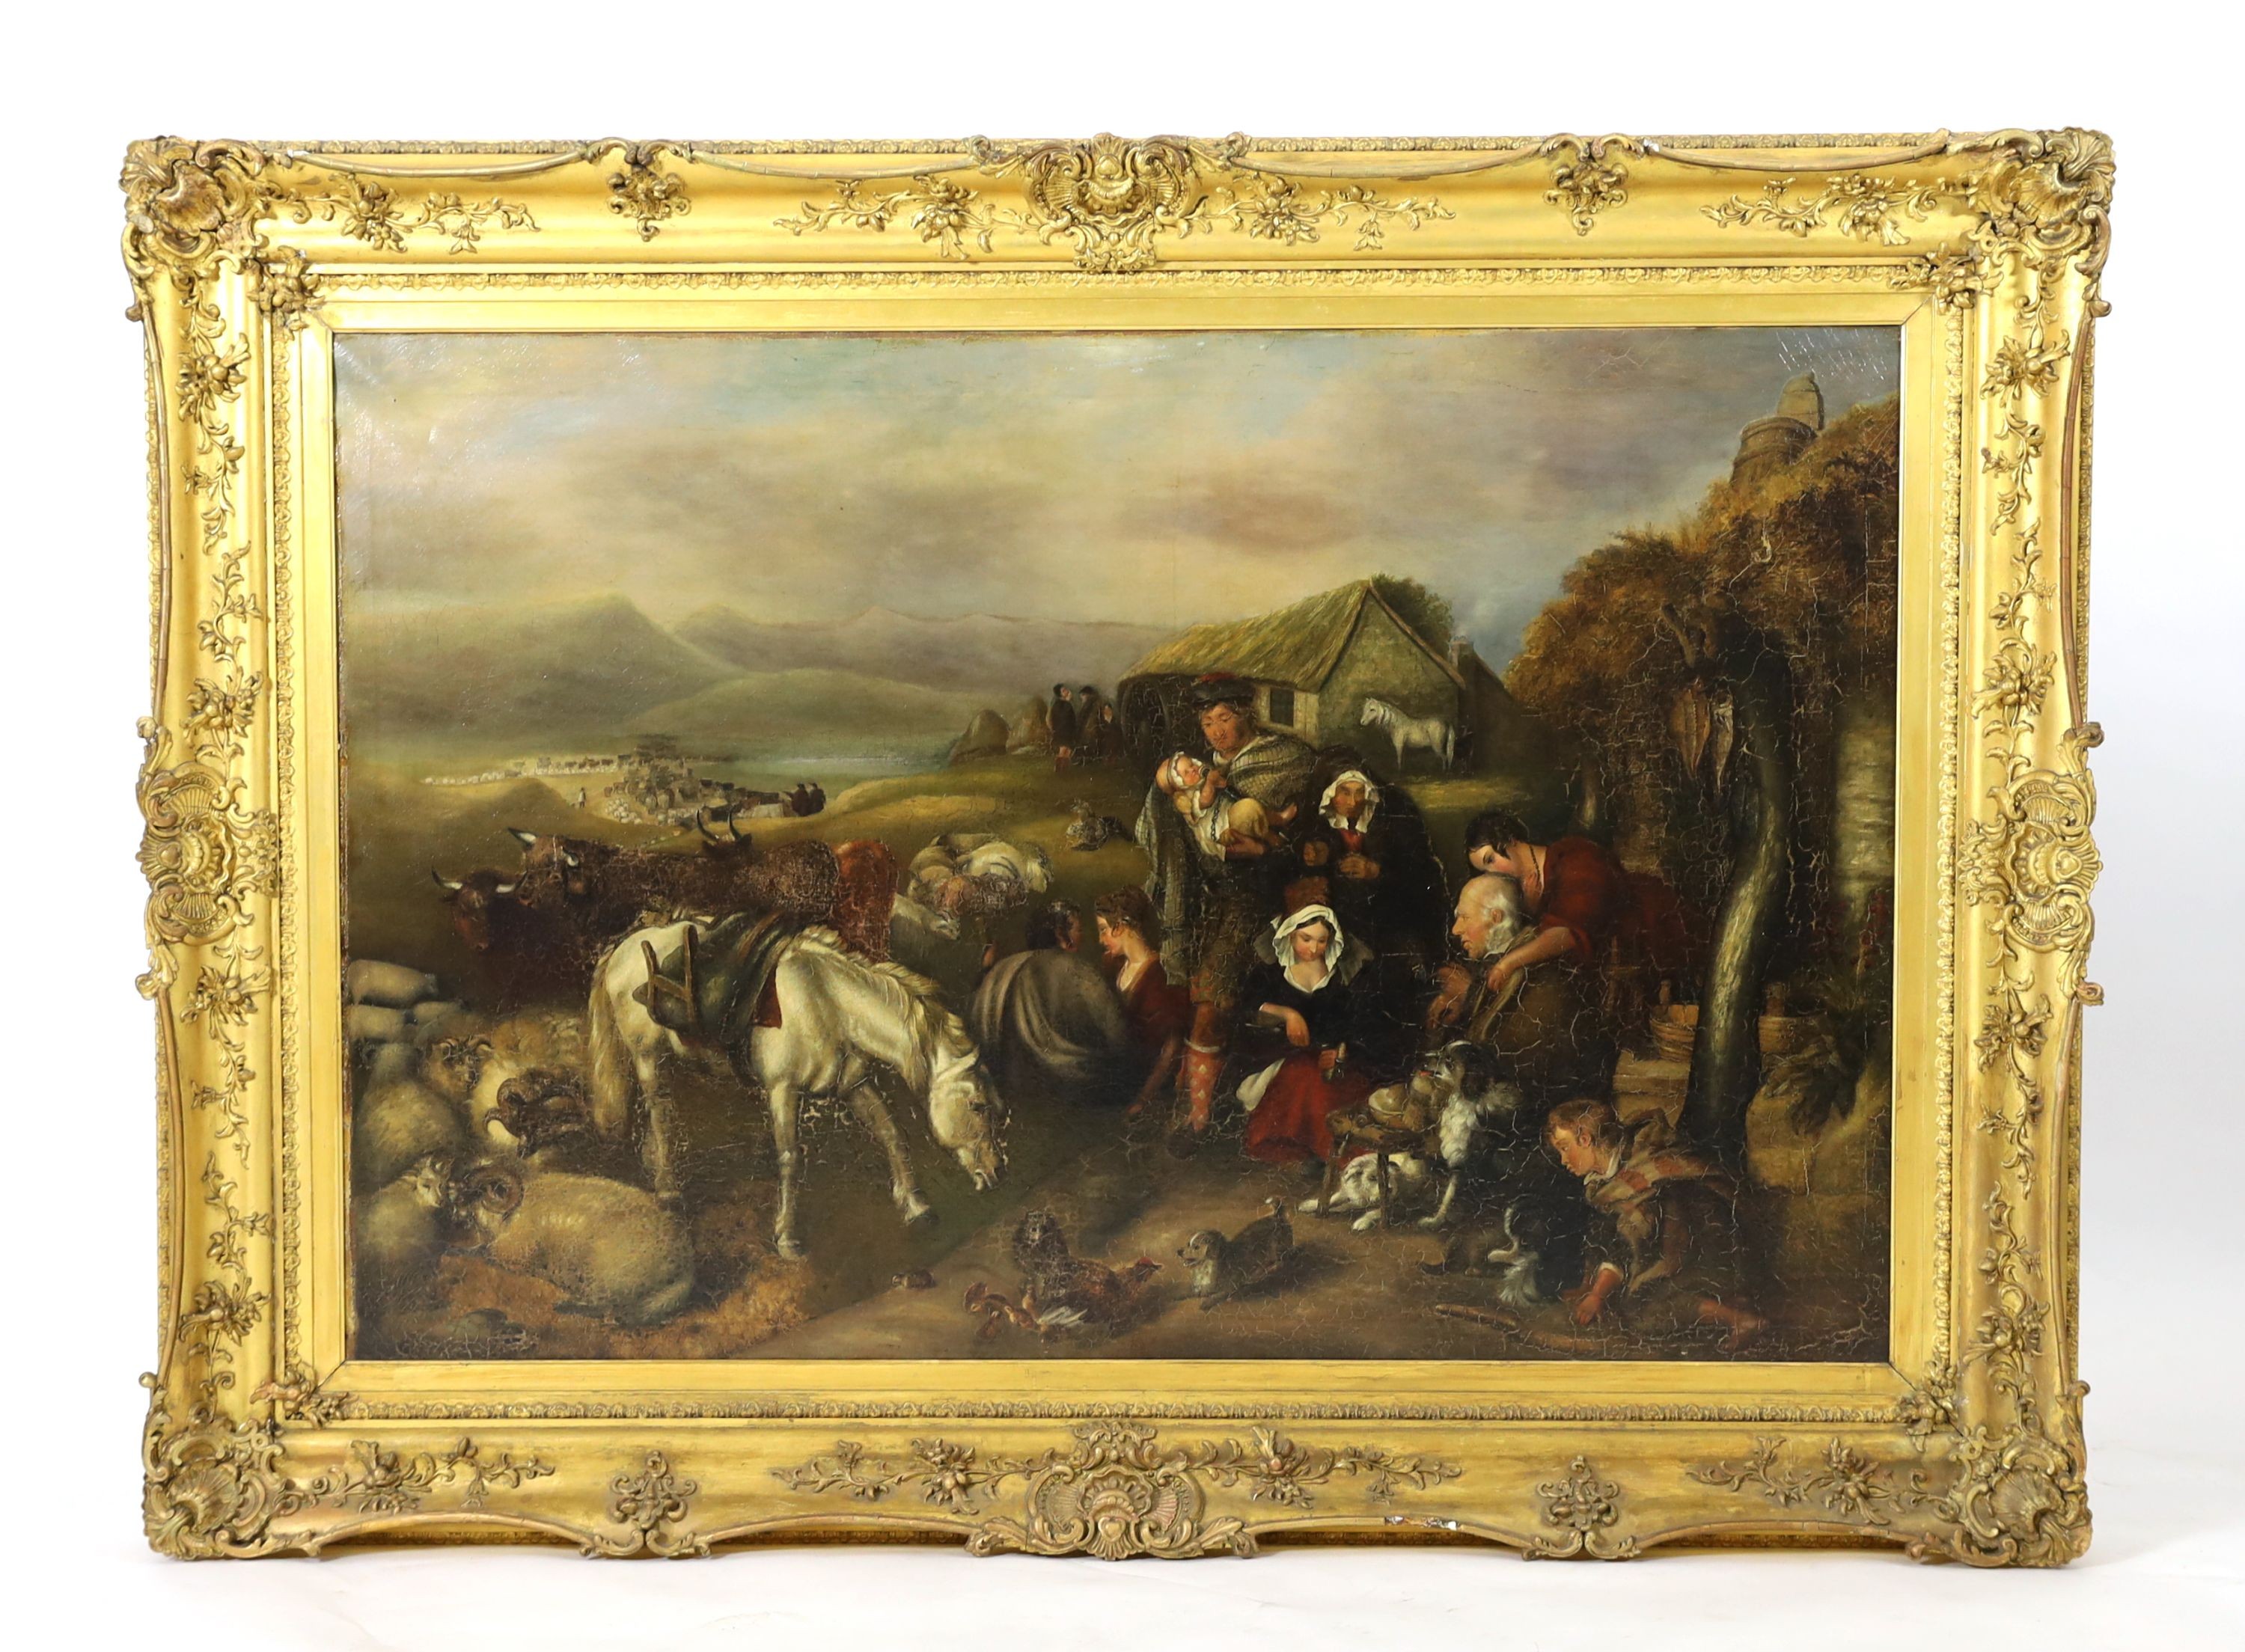 19th century Scottish School , Highlanders beside a croft with dogs, ponies, cattle and sheep, oil on canvas, 96 x 144cm